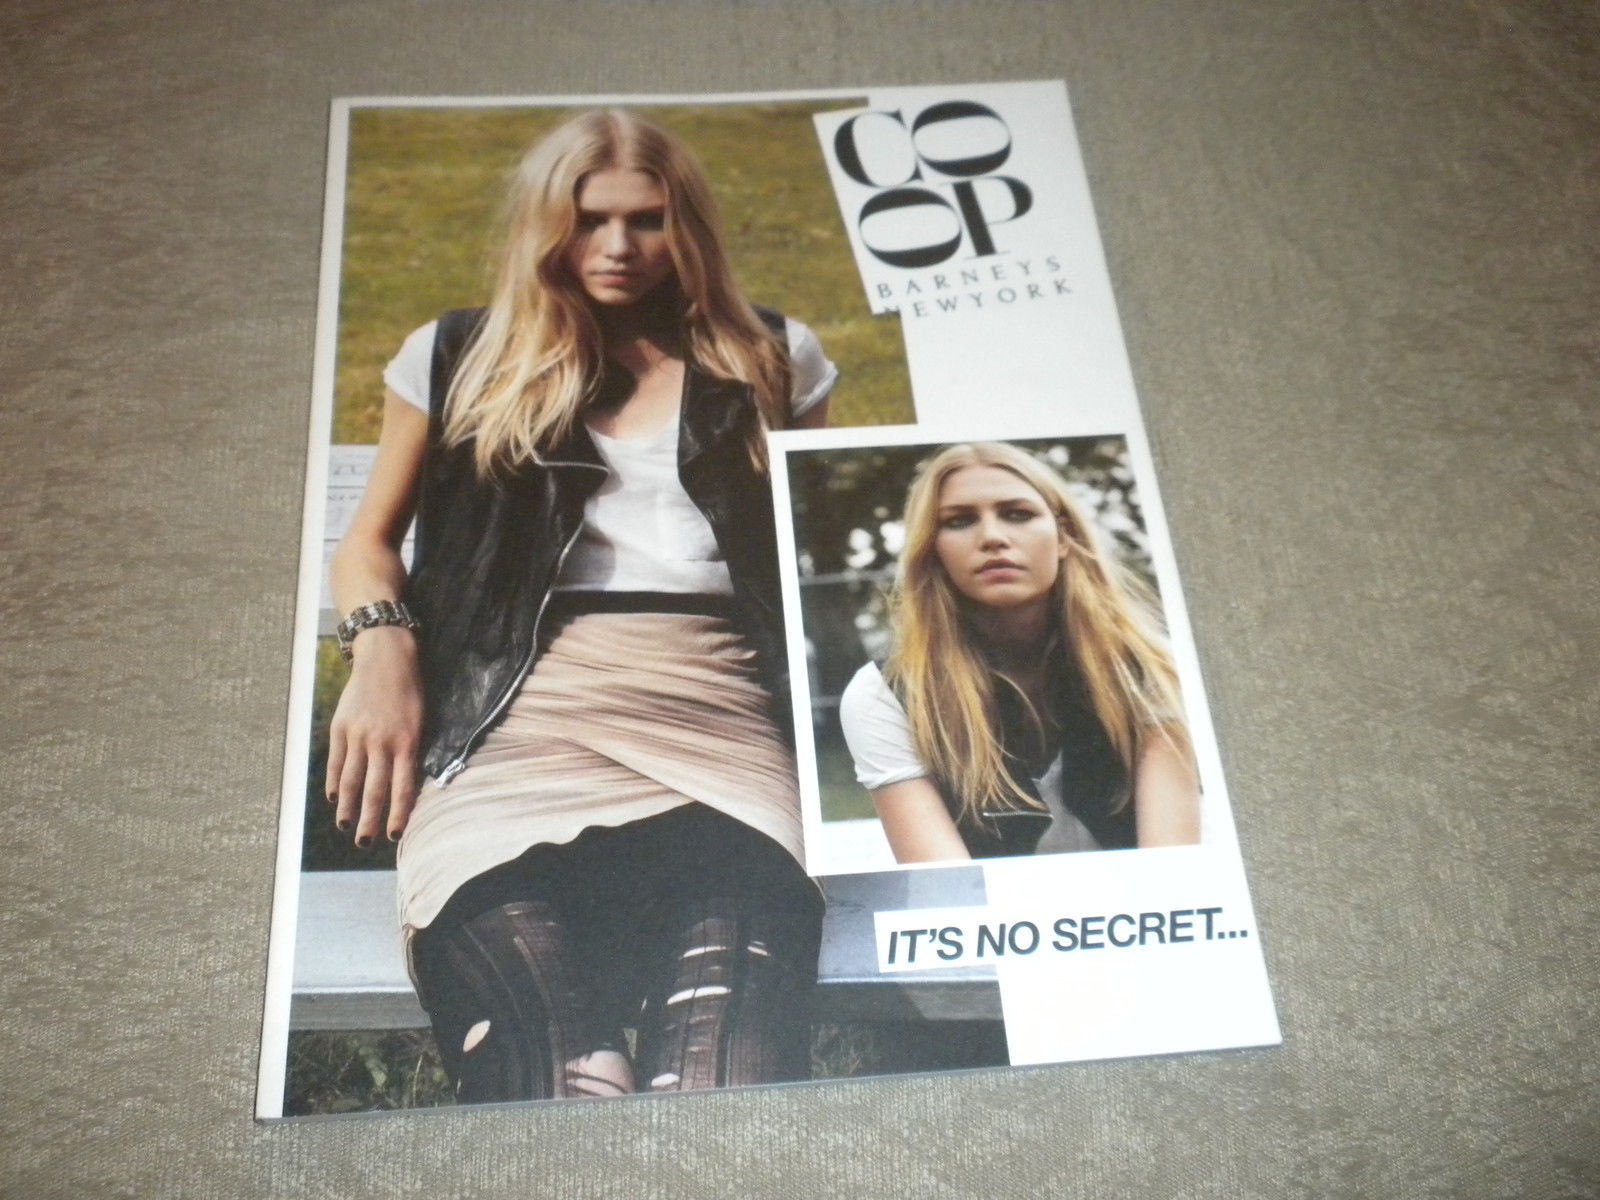 Primary image for Barneys New York Co-op "It's No Secret" Fashion Photo Catalog 53 pgs Fall  2008